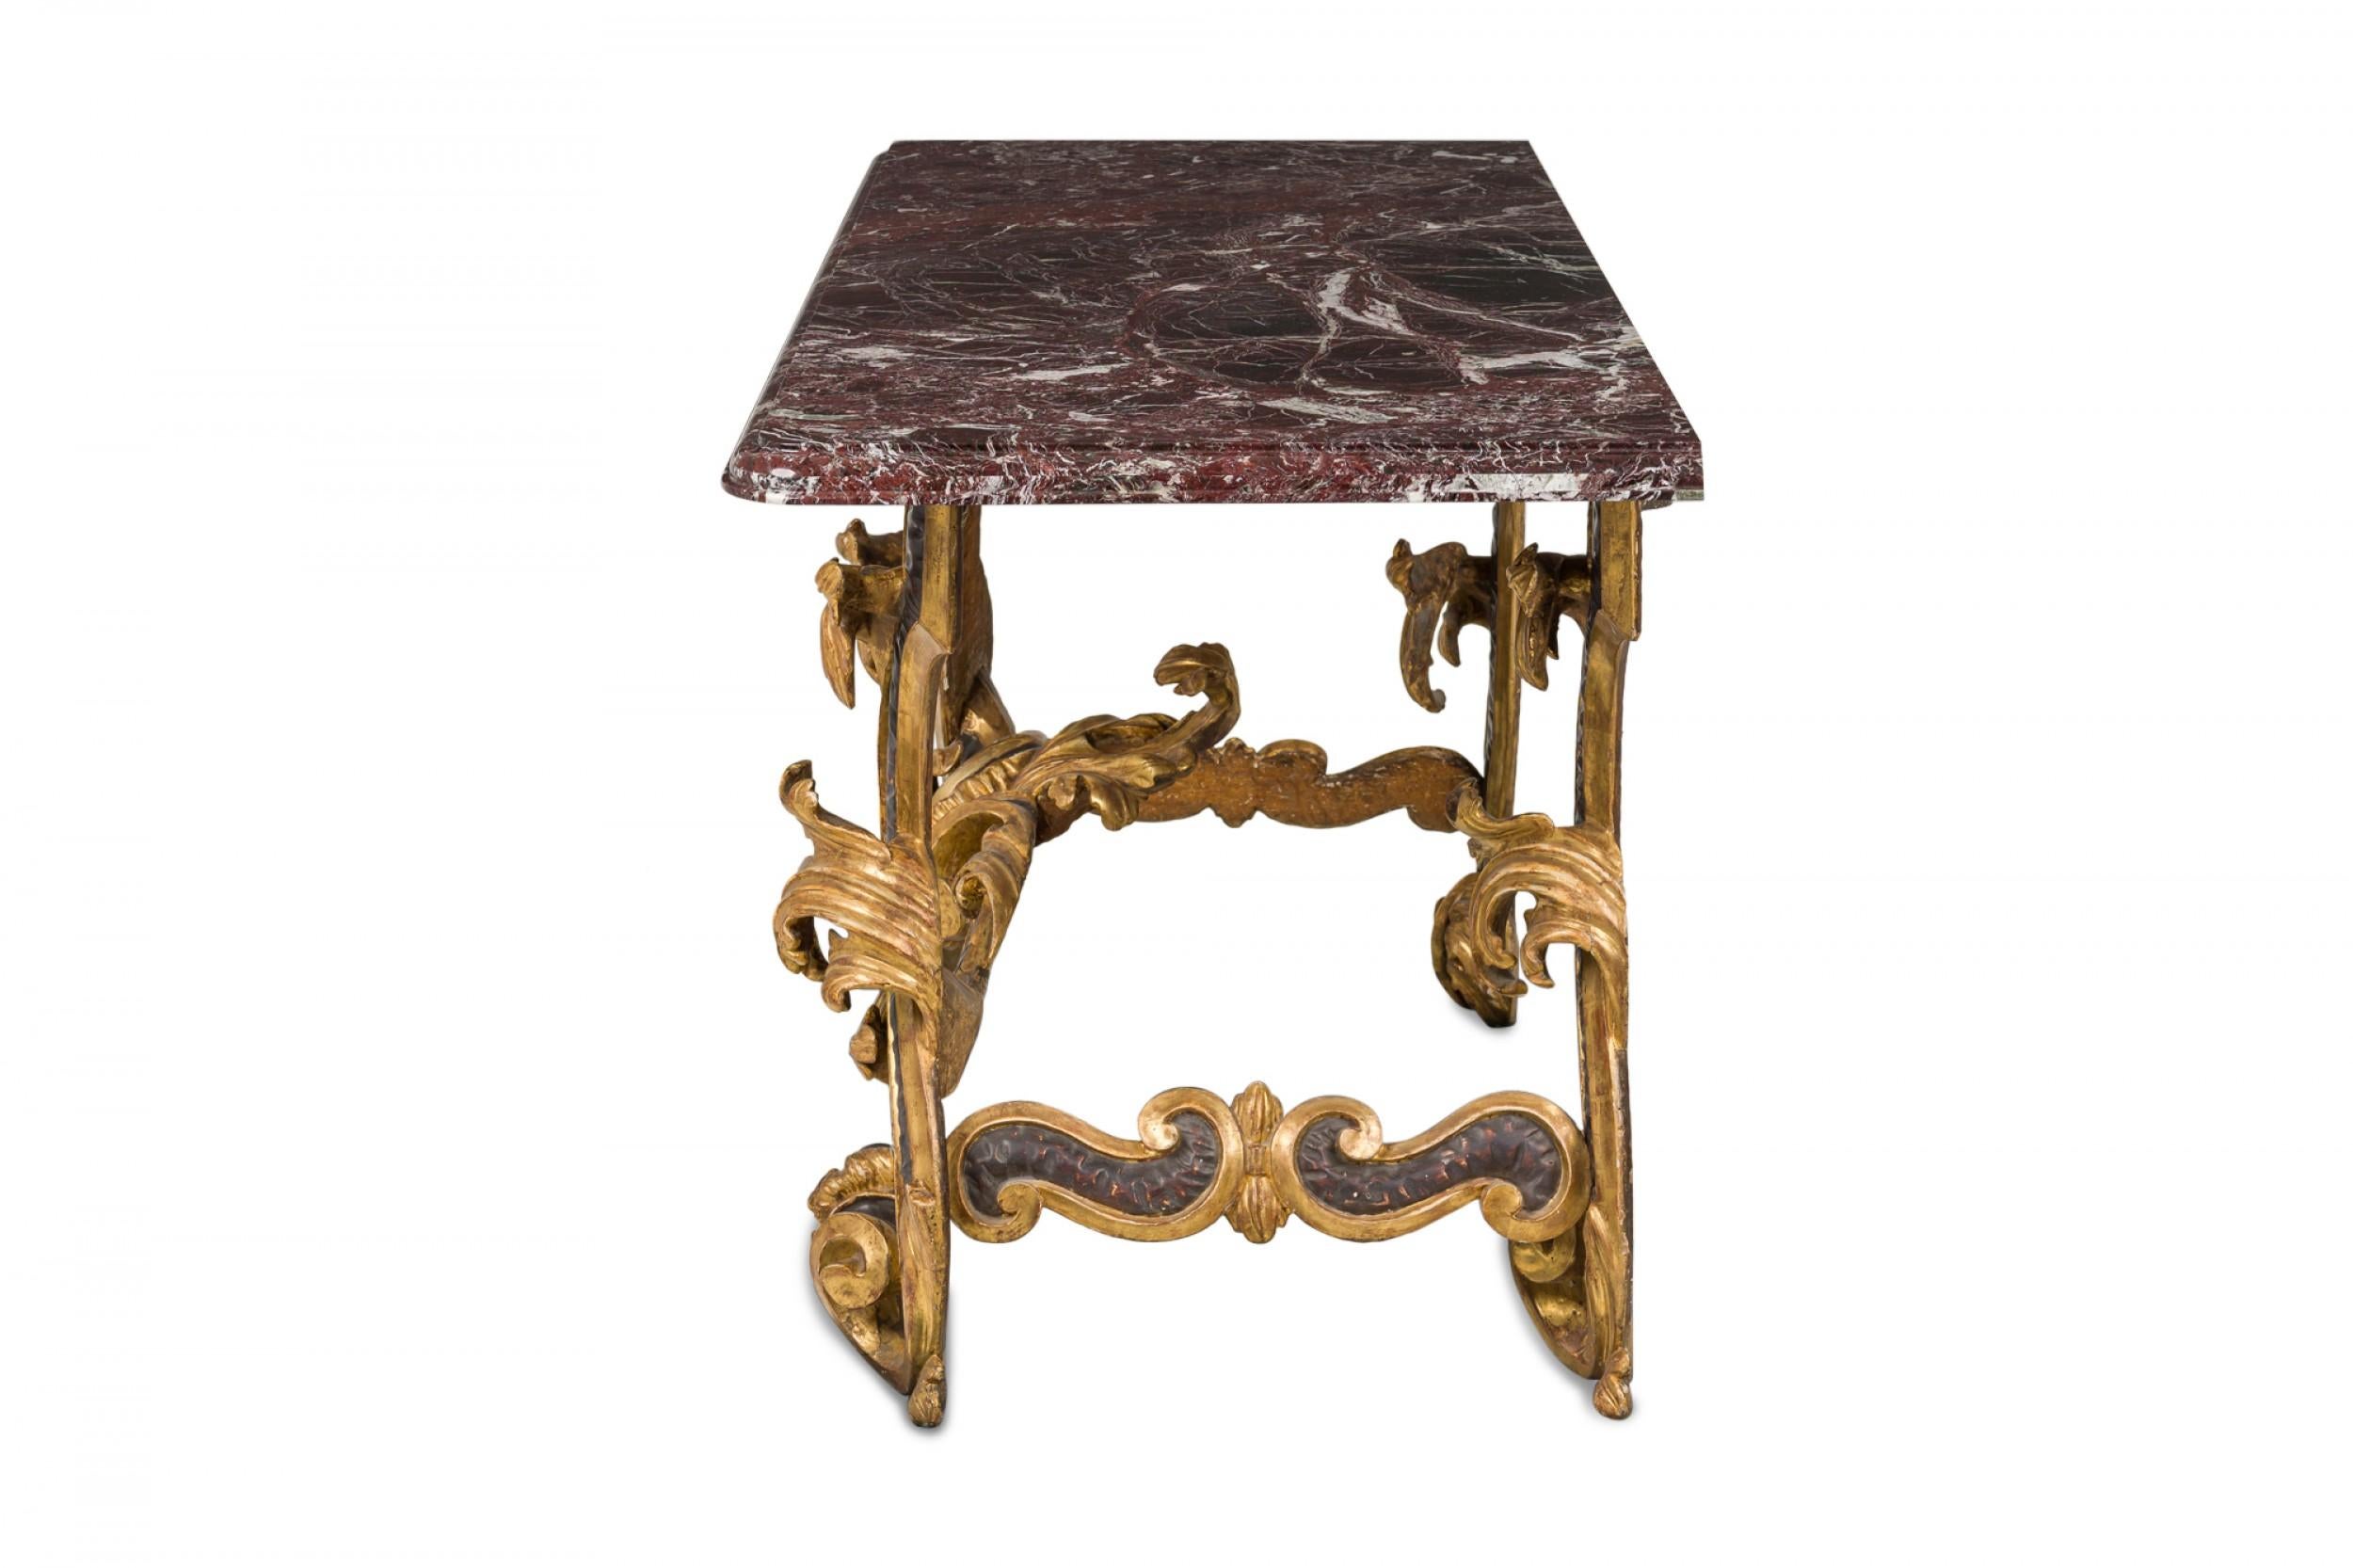 Italian Rococo-Style Green Giltwood and Deep Burgundy Marble Scroll Design Conso For Sale 1